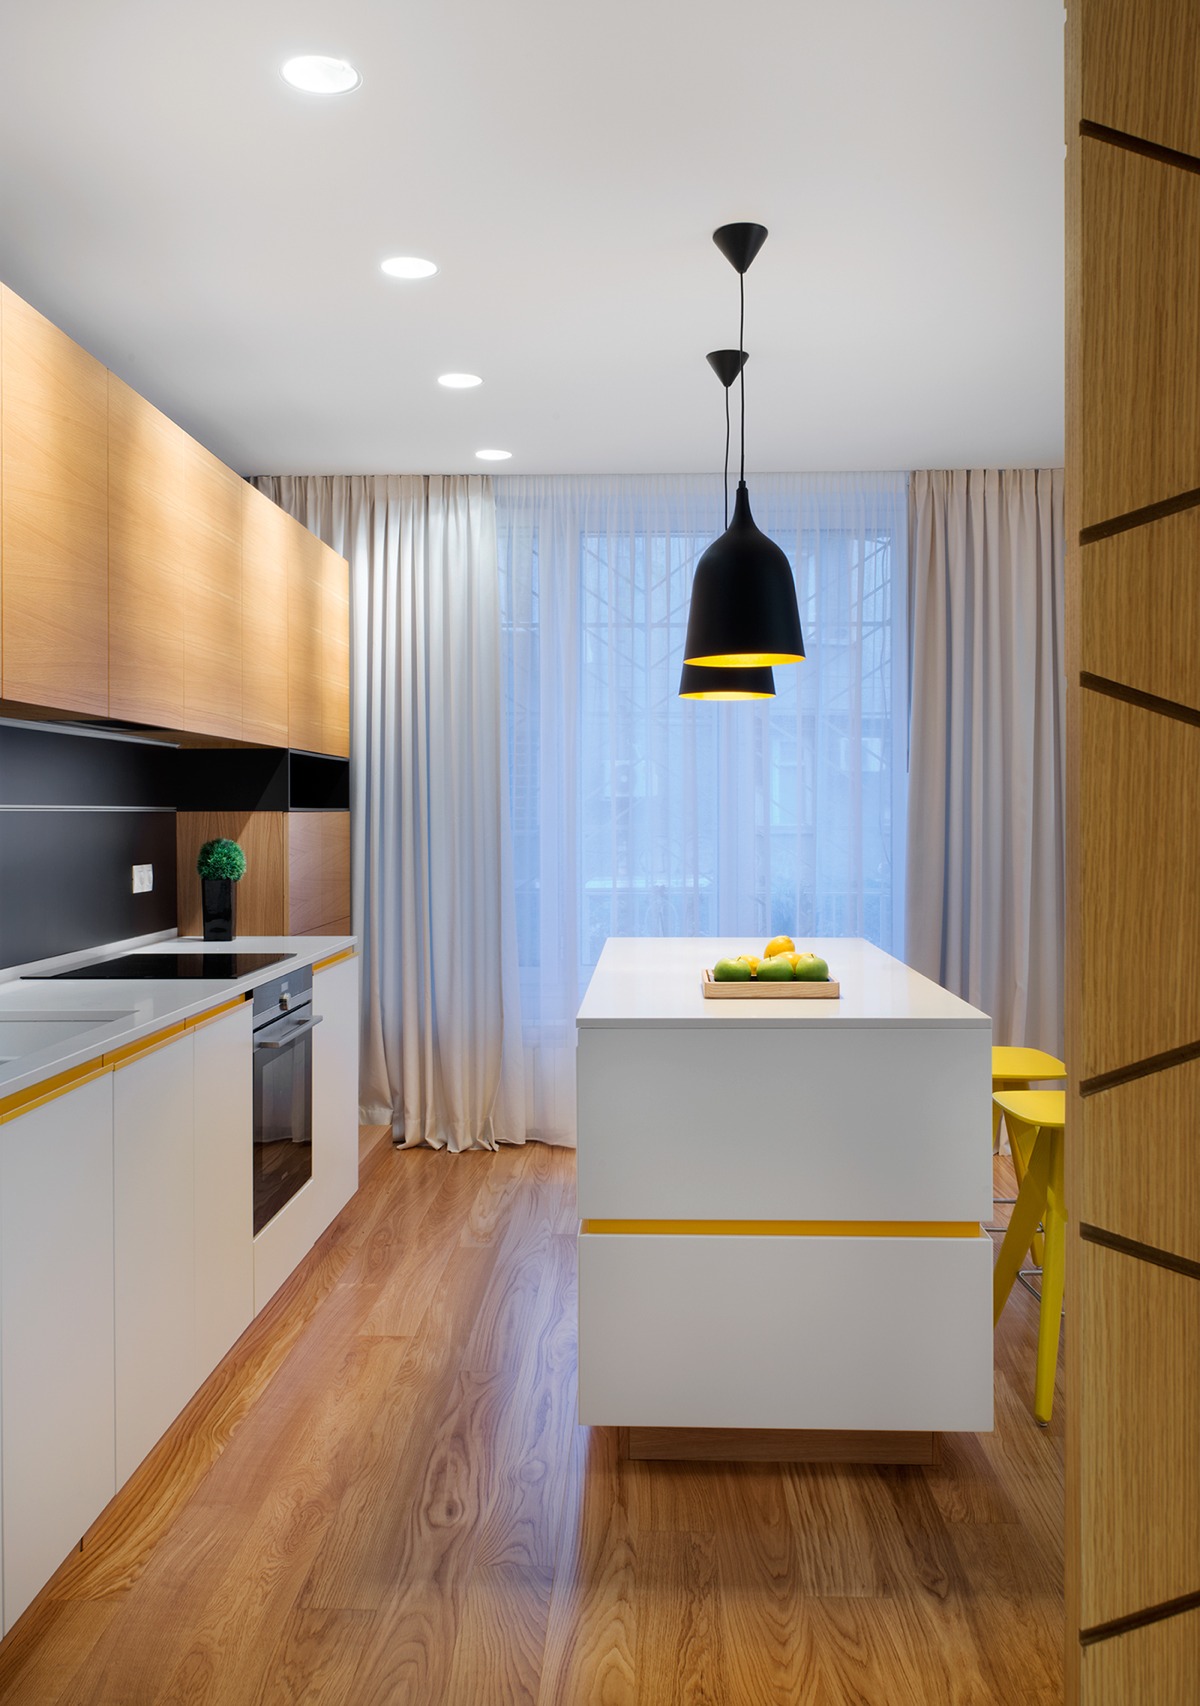 Bands of yellow brighten the sleek and modern kitchen space while